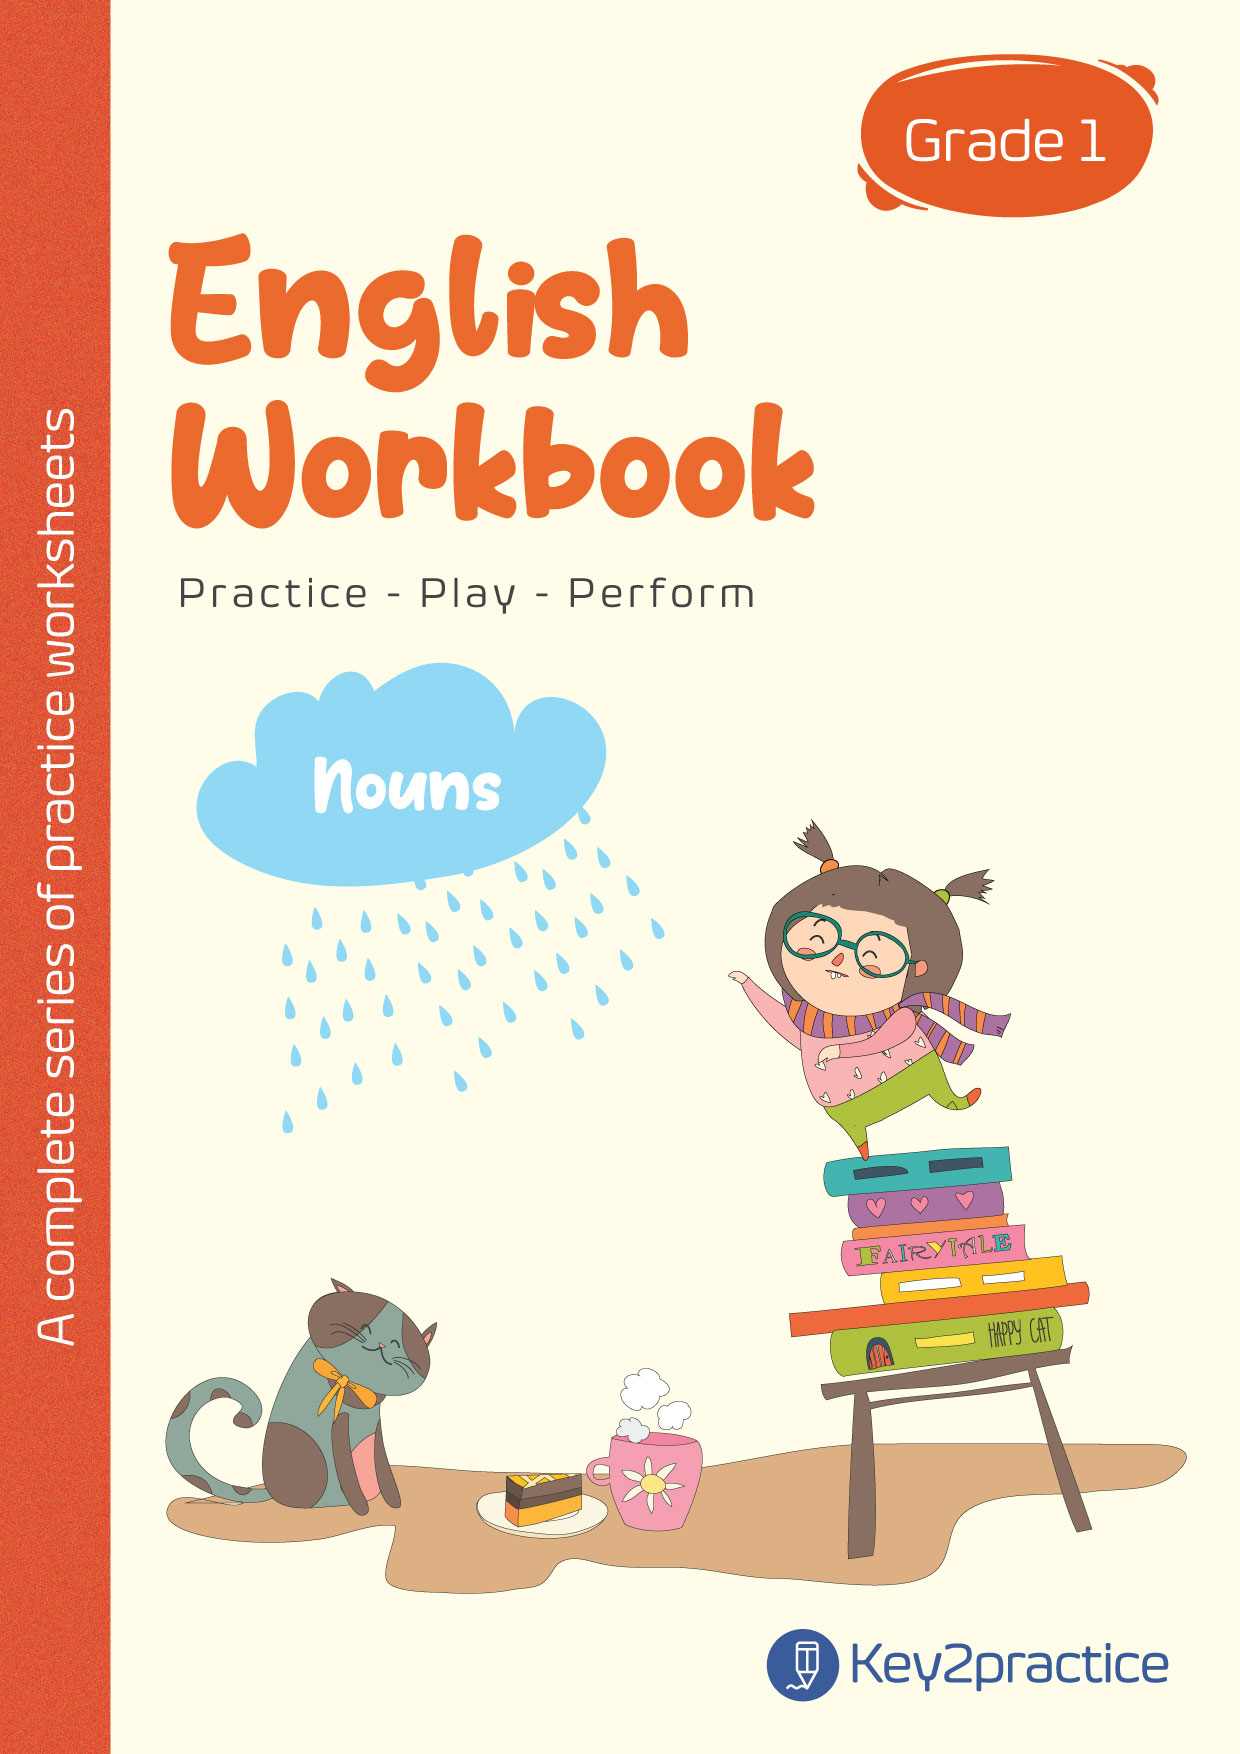 English Worksheets For Foreign Students